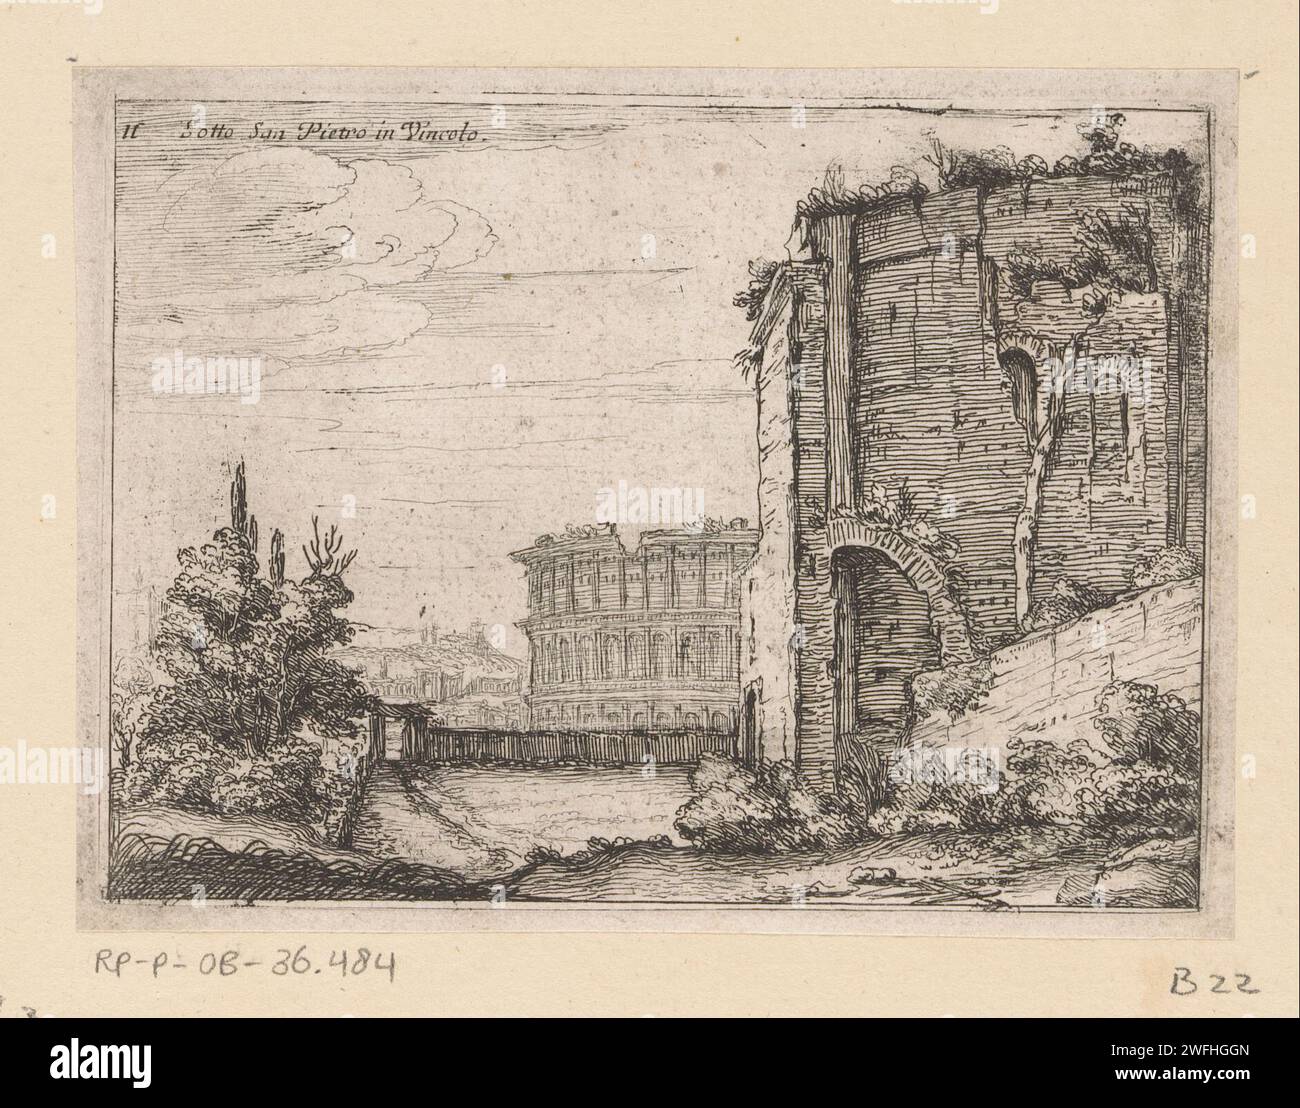 Ruins of Antique Building and the Colosseum in Rome, Giovanni Battista Mercati, 1629 print View of the Colosseum from the San Pietro in Vincoli in Rome. On the right the remains of possibly the Thermen of Titus. print maker: Italyafter own design by: ItalyItalyToscane paper etching landscape with ruins Colosseum. Thermen from Titus Stock Photo